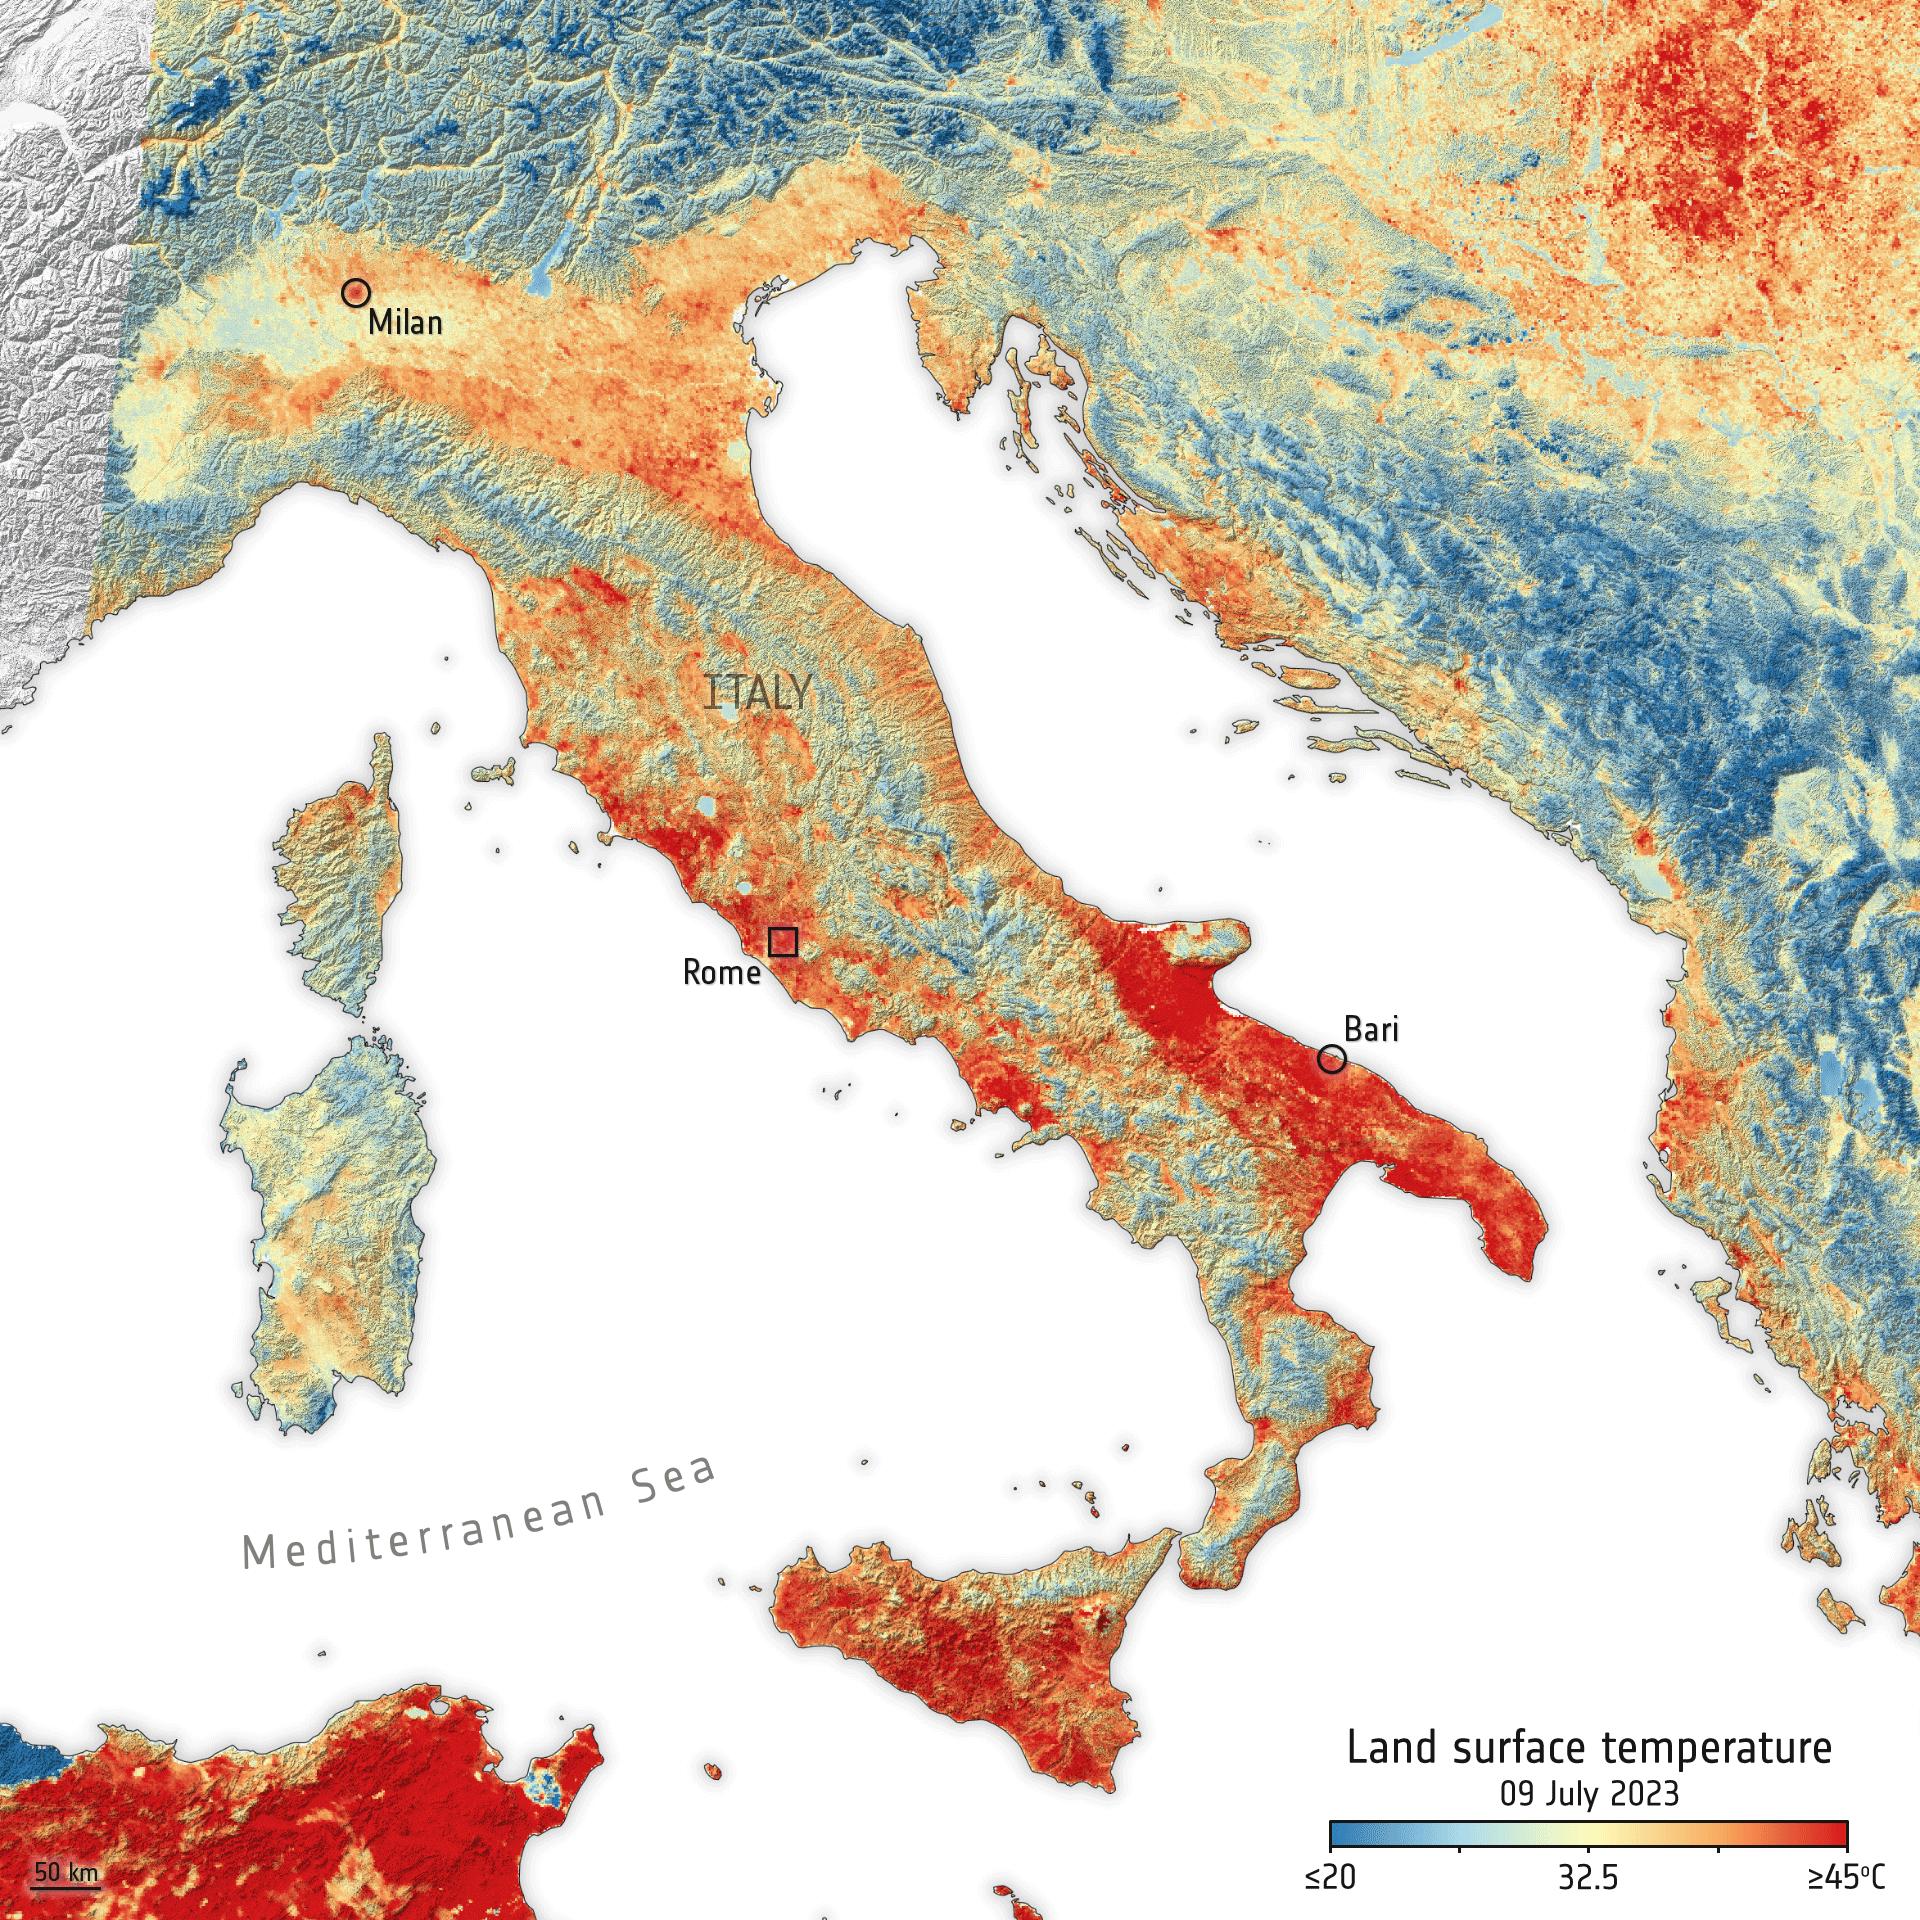 This animation was created using data from the Copernicus Sentinel-3 mission's radiometer instrument and shows the land-surface temperature across Italy on 9-10 July 2023. On the slopes of Mount Etna, in Sicily, as well as in the region of Puglia, surface temperatures surpassed 47°C.